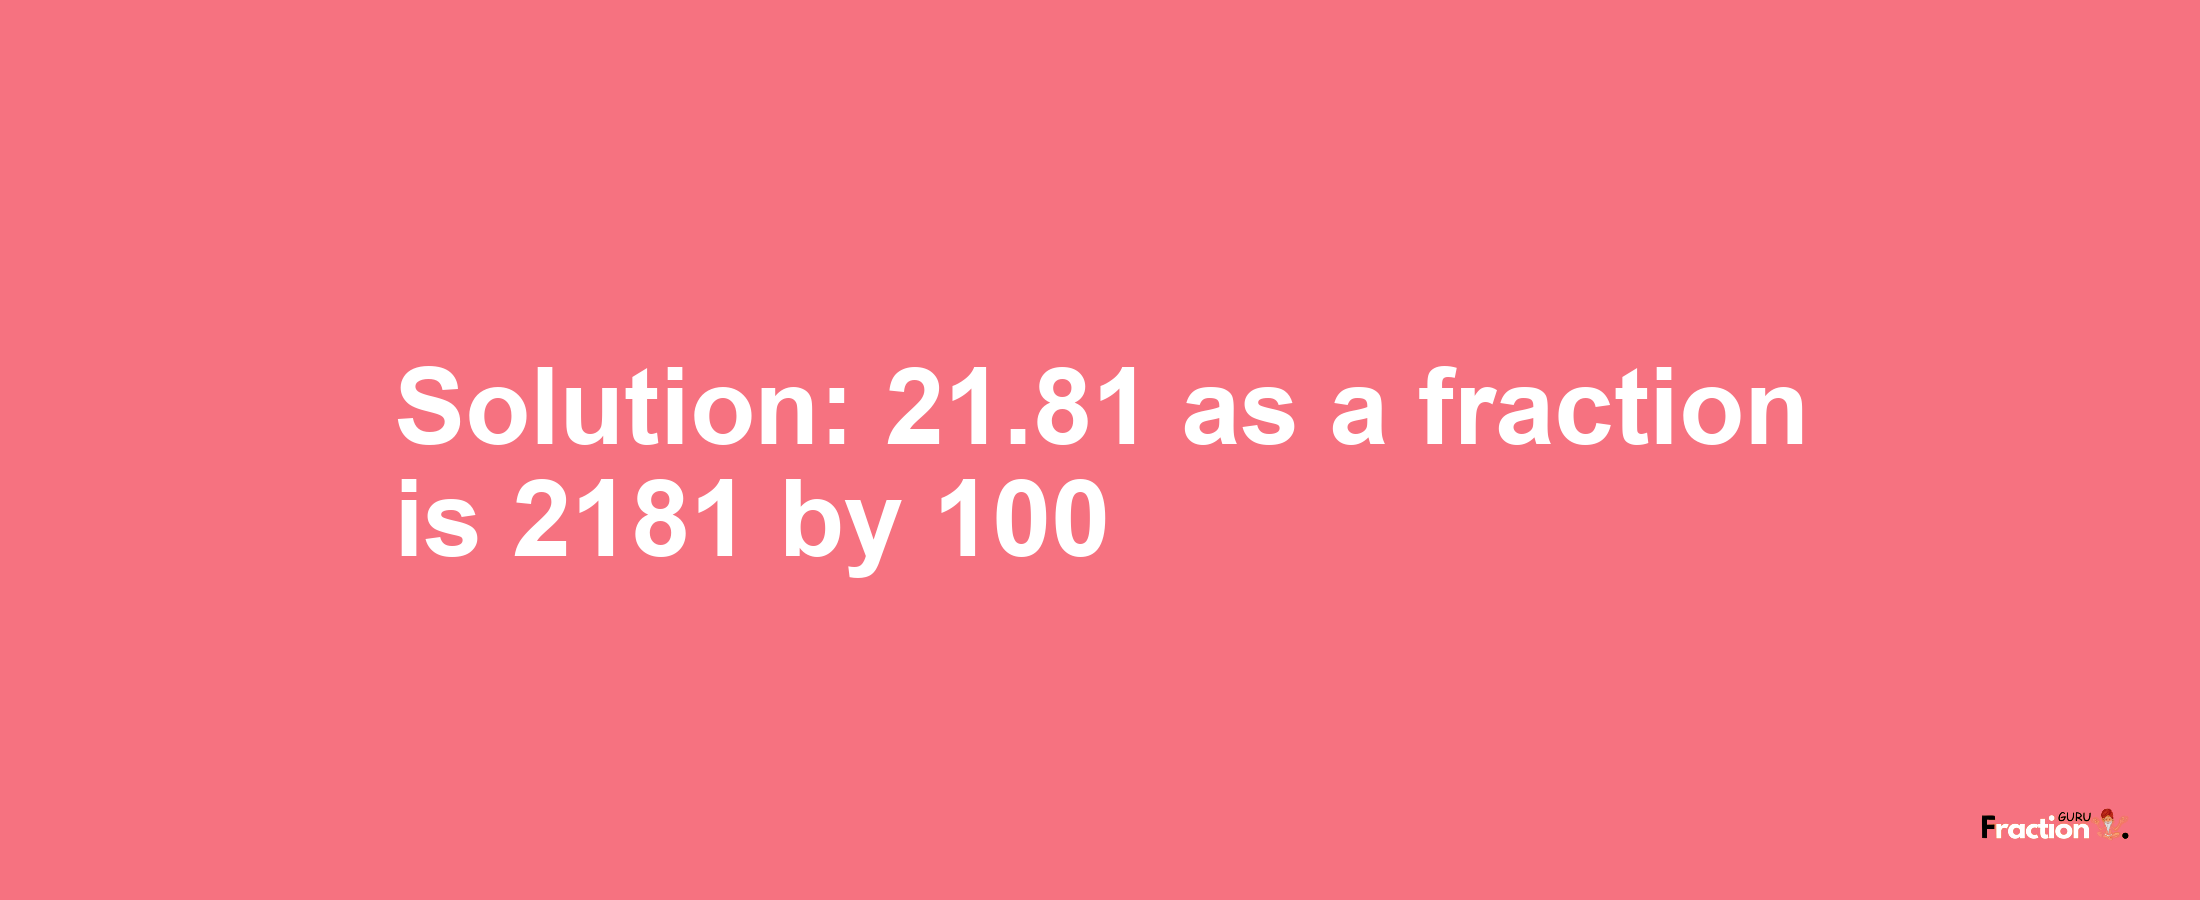 Solution:21.81 as a fraction is 2181/100